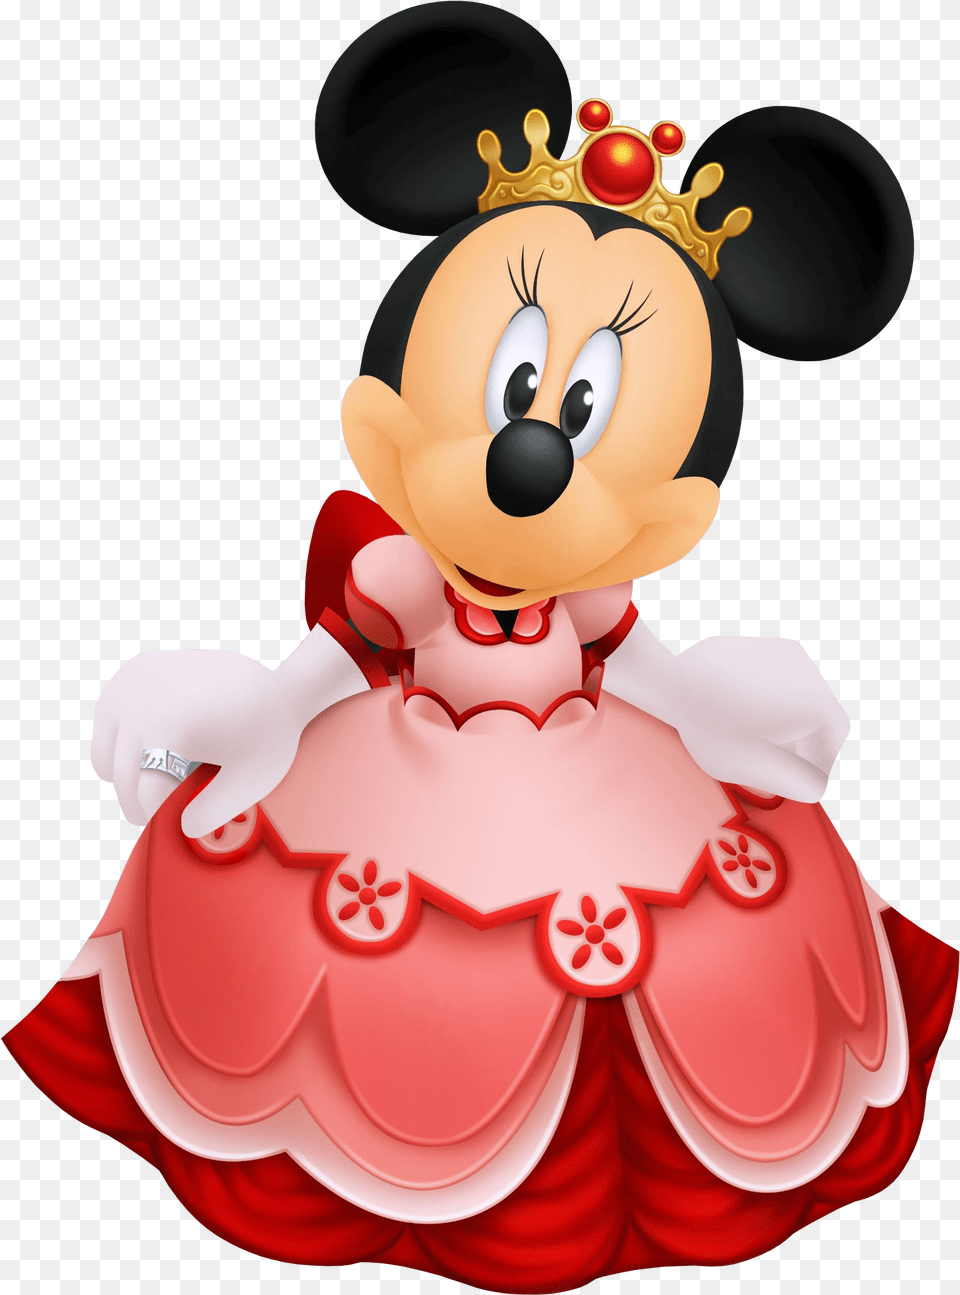 Mickey Mouse Clipart Gold Minnie Mouse Princess, Birthday Cake, Cake, Cream, Dessert Png Image